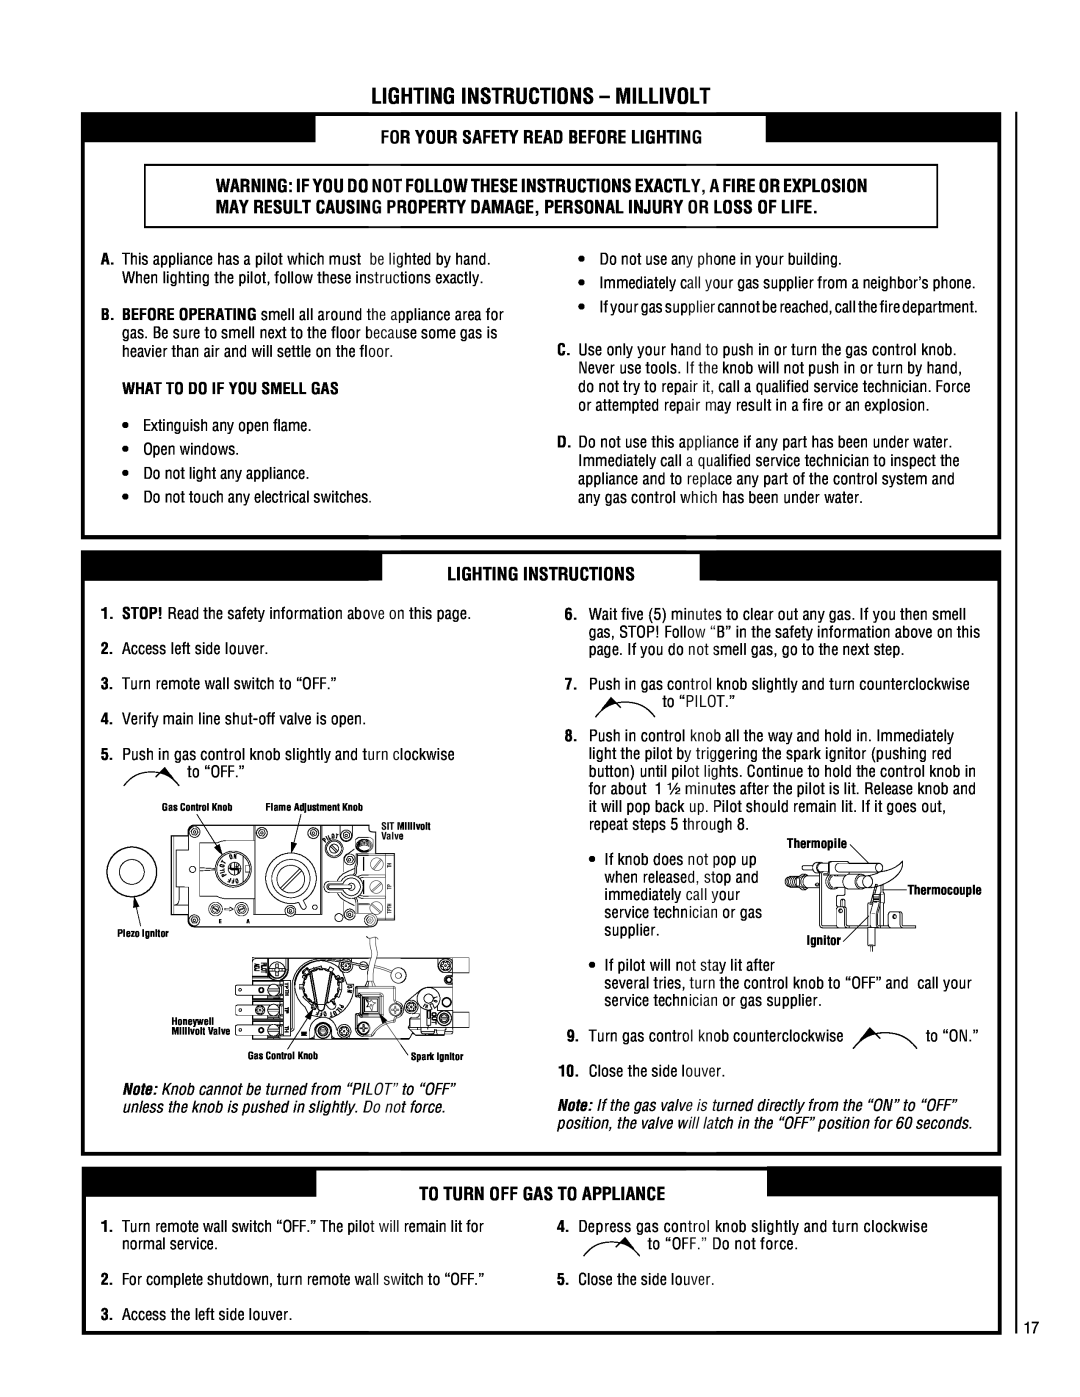 Superior CF5500-CMP Lighting Instructions - Millivolt, For Your Safety Read Before Lighting, To Turn Off Gas To Appliance 